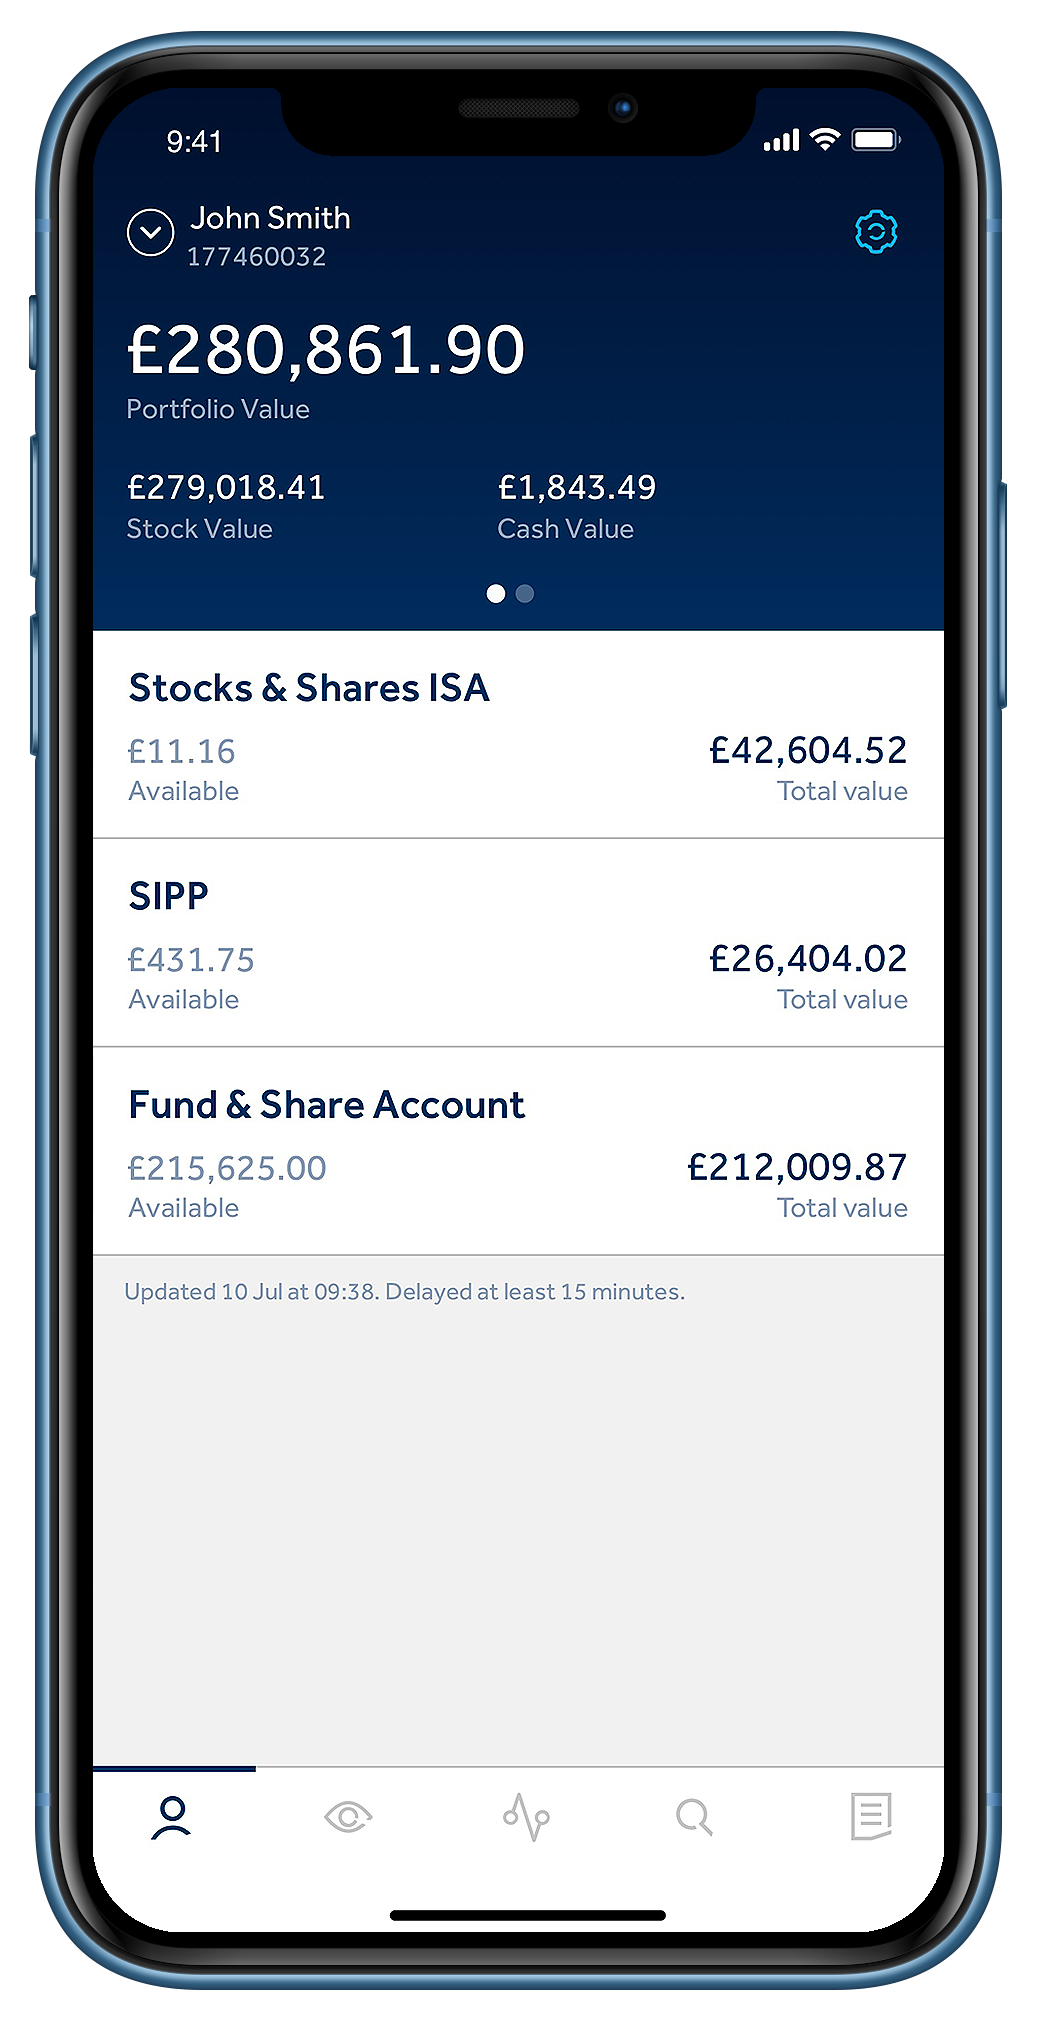 35 Top Images Stock Investing Apps Uk / Mps Sound The Alarm On Robinhood Style Investing Apps